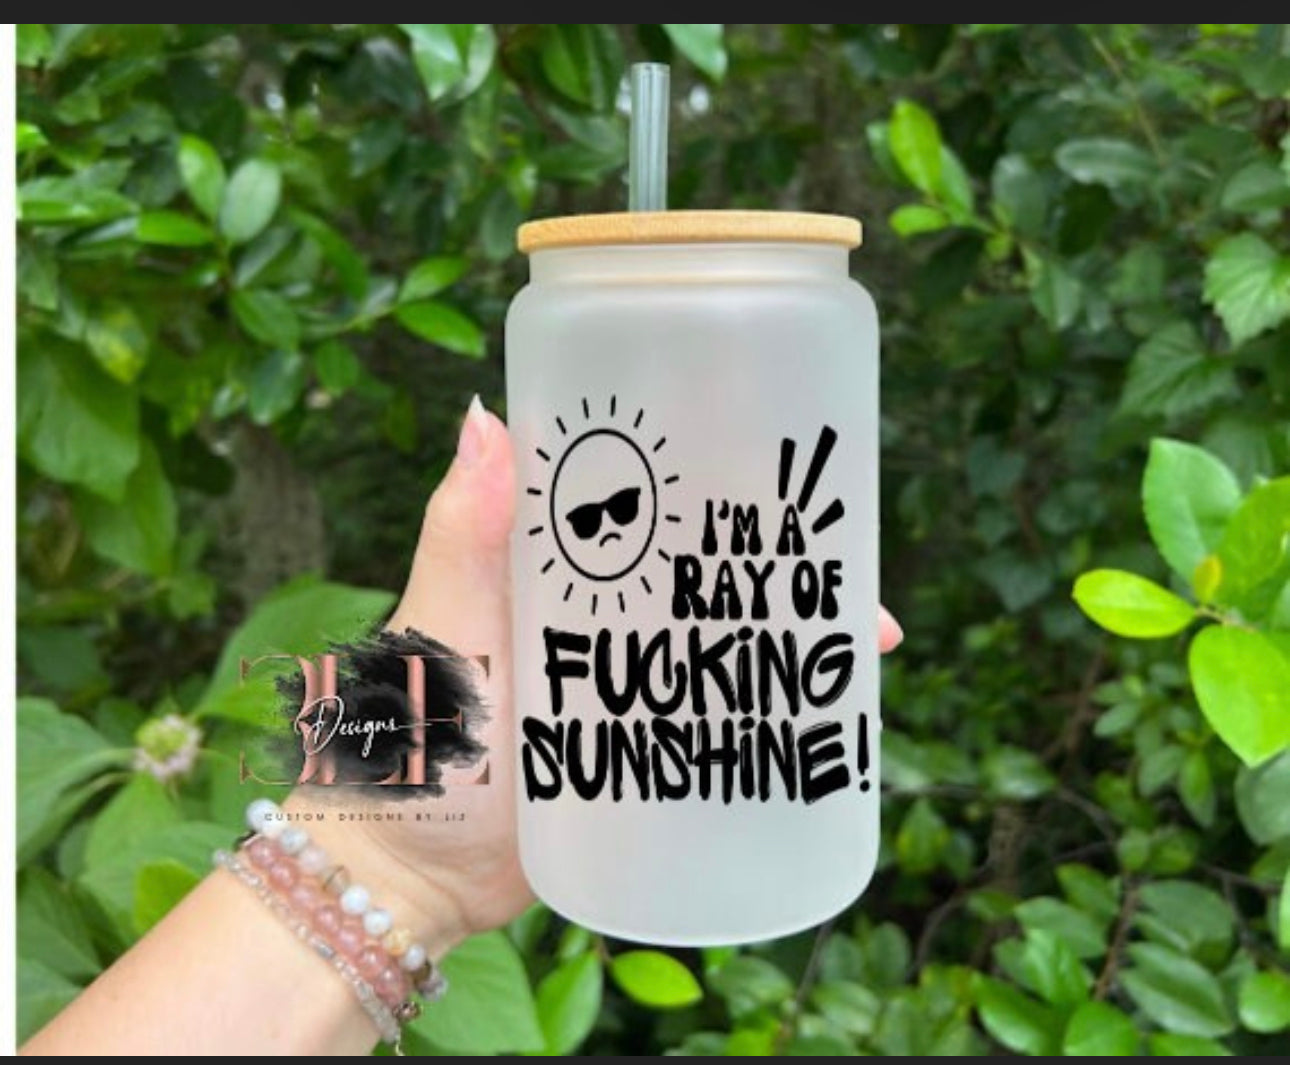 I’m A Ray Of Fucking Sunshine Glass Cup With Wood Lid and Straw, Adult Humor Cup, Sarcastic Gift, Funny Gift idea, Funny Saying on A Cup